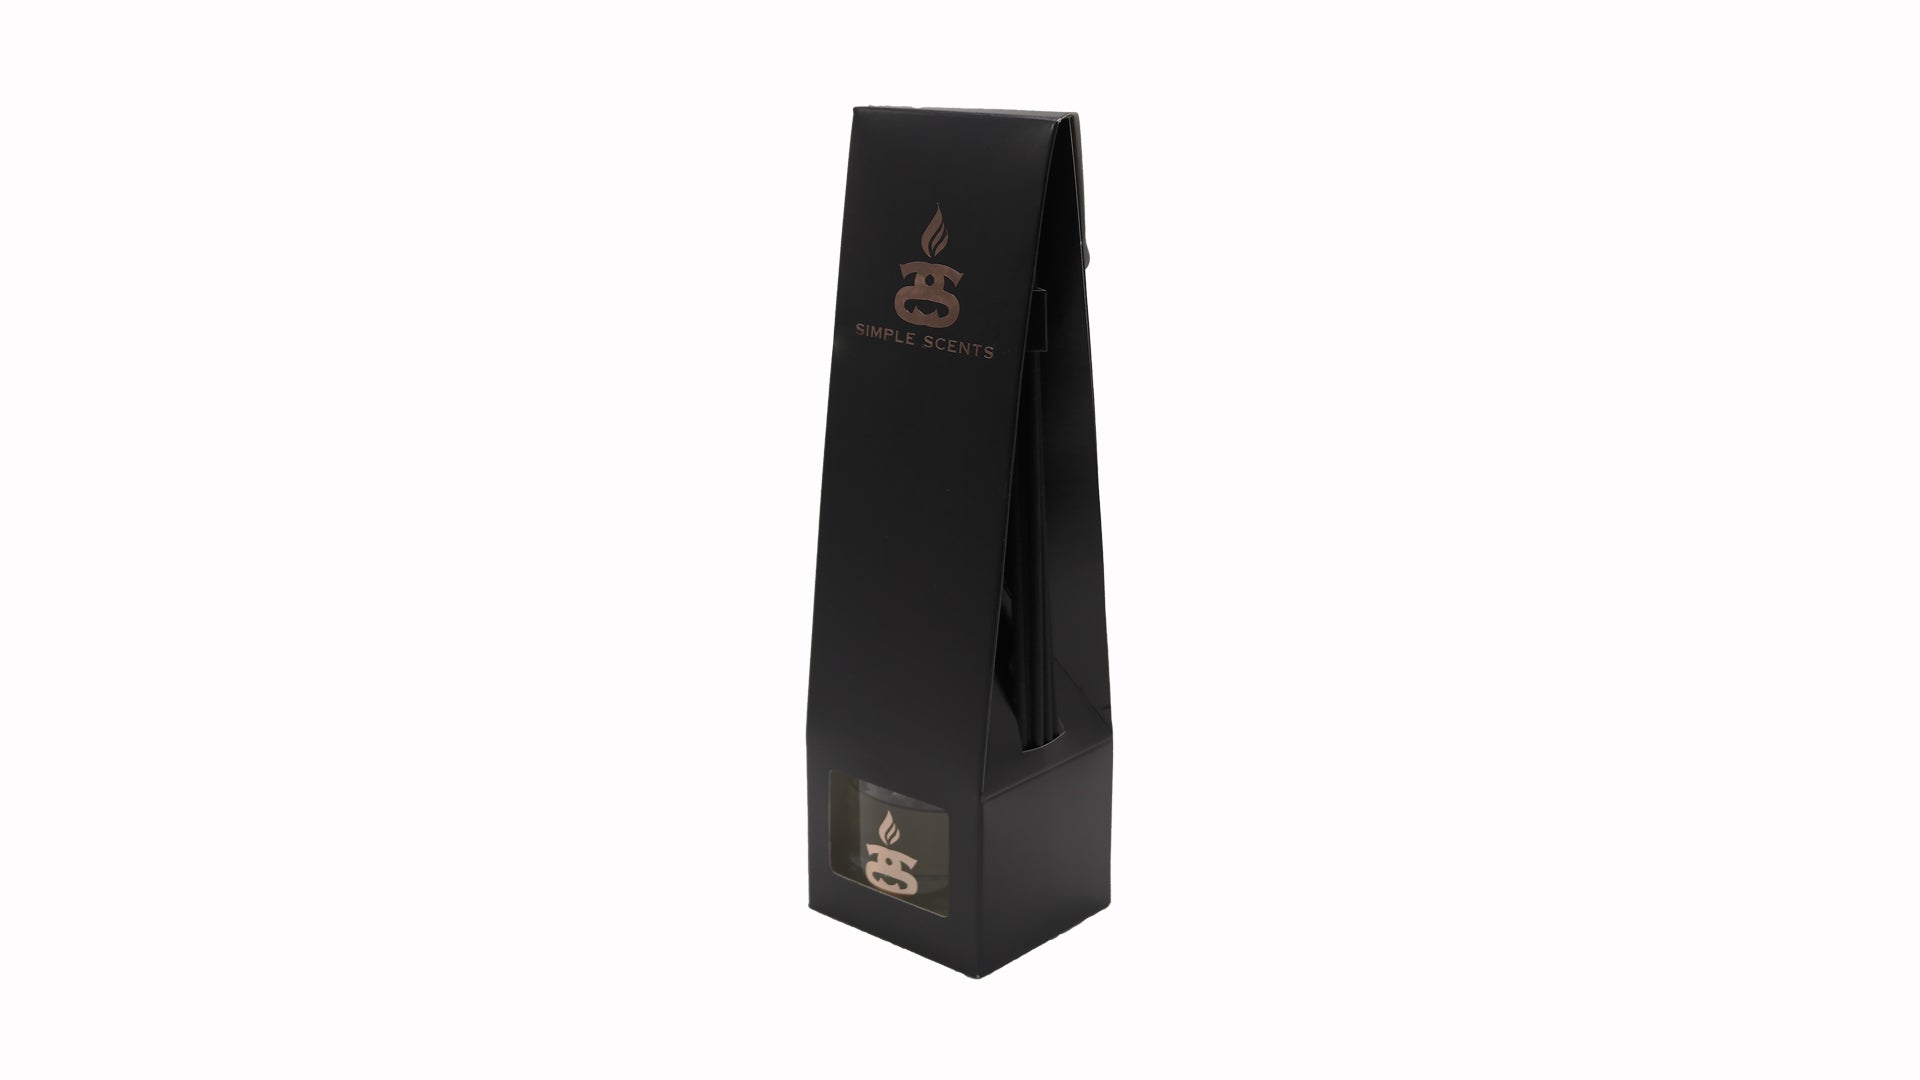 Simple Scents Excellence Reed Diffuser in black packaging with reeds, side profile